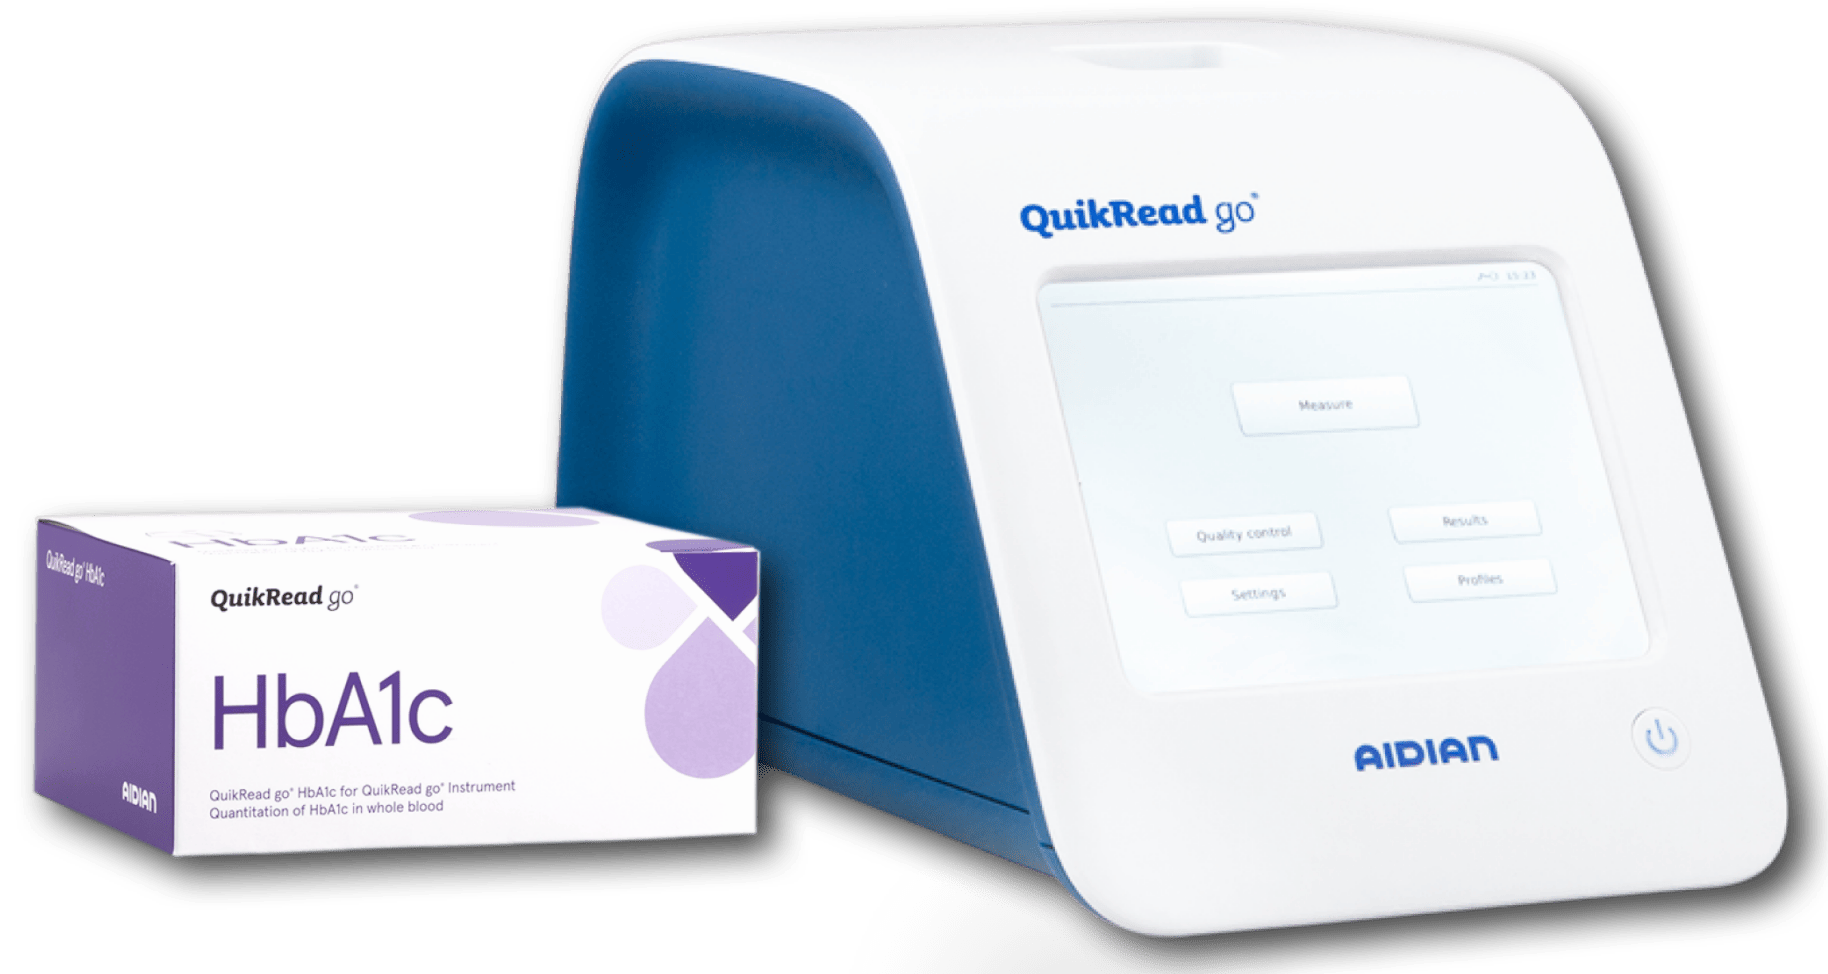 QuikRead and HbA1c Test Image